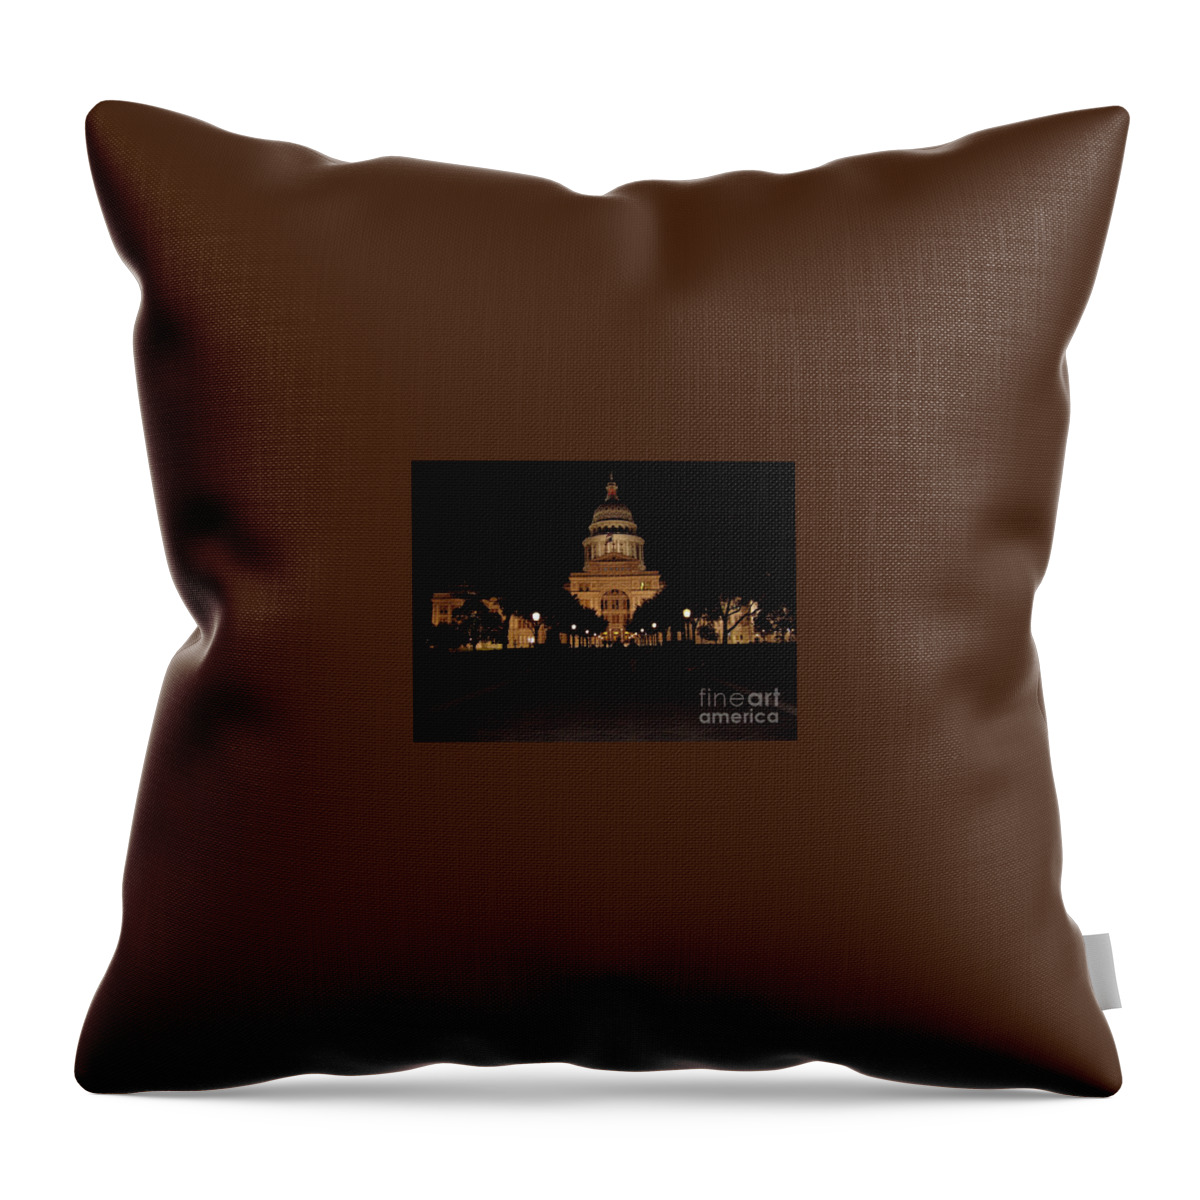 Texas State Capital Throw Pillow featuring the photograph Texas State Capital by John Telfer